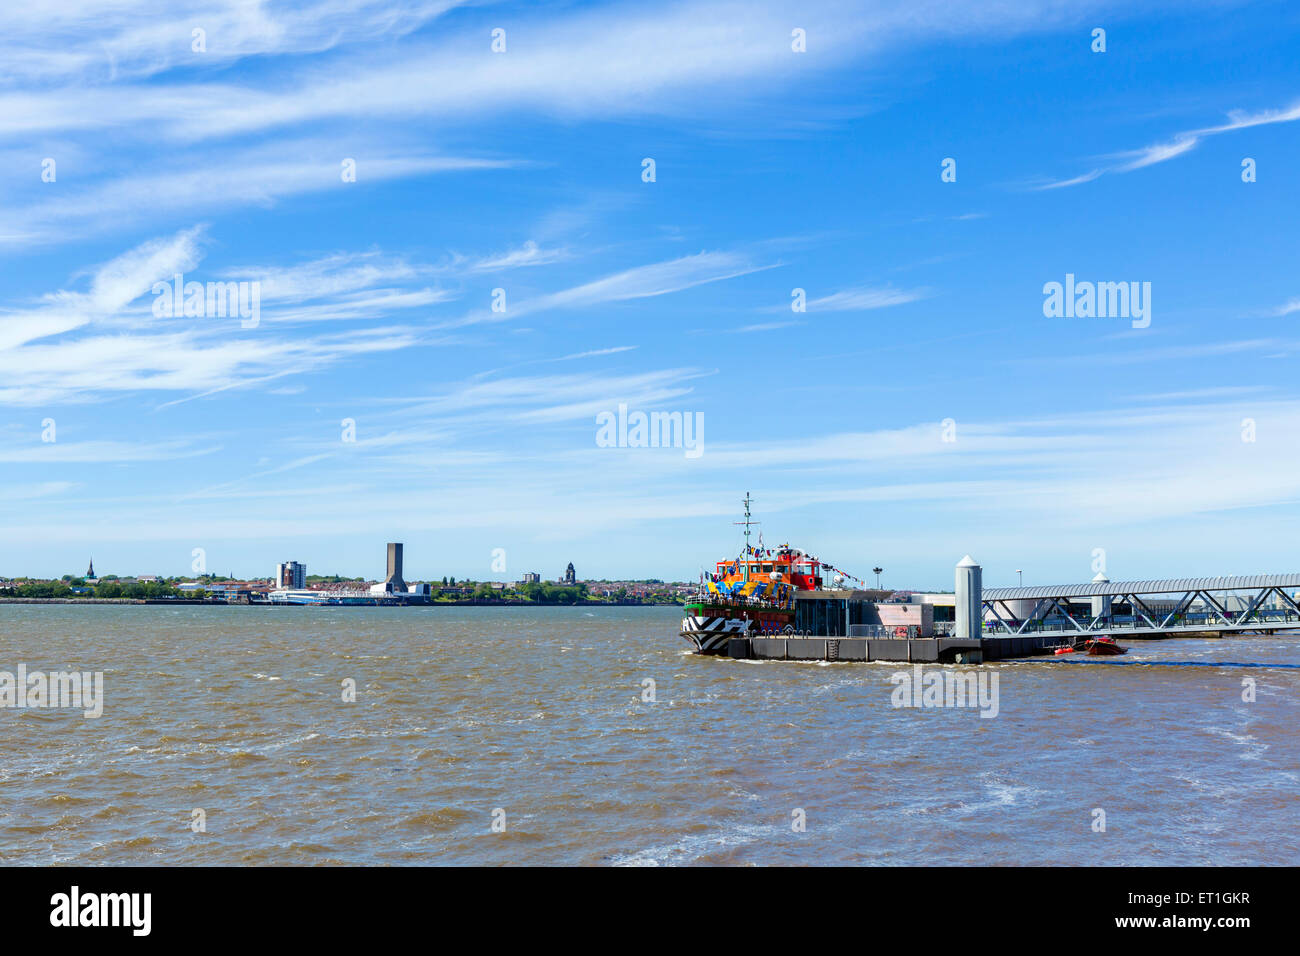 The Mersey Ferry docked at Pier Head with the Wirral in the distance, Liverpool, Merseyside, England, UK Stock Photo